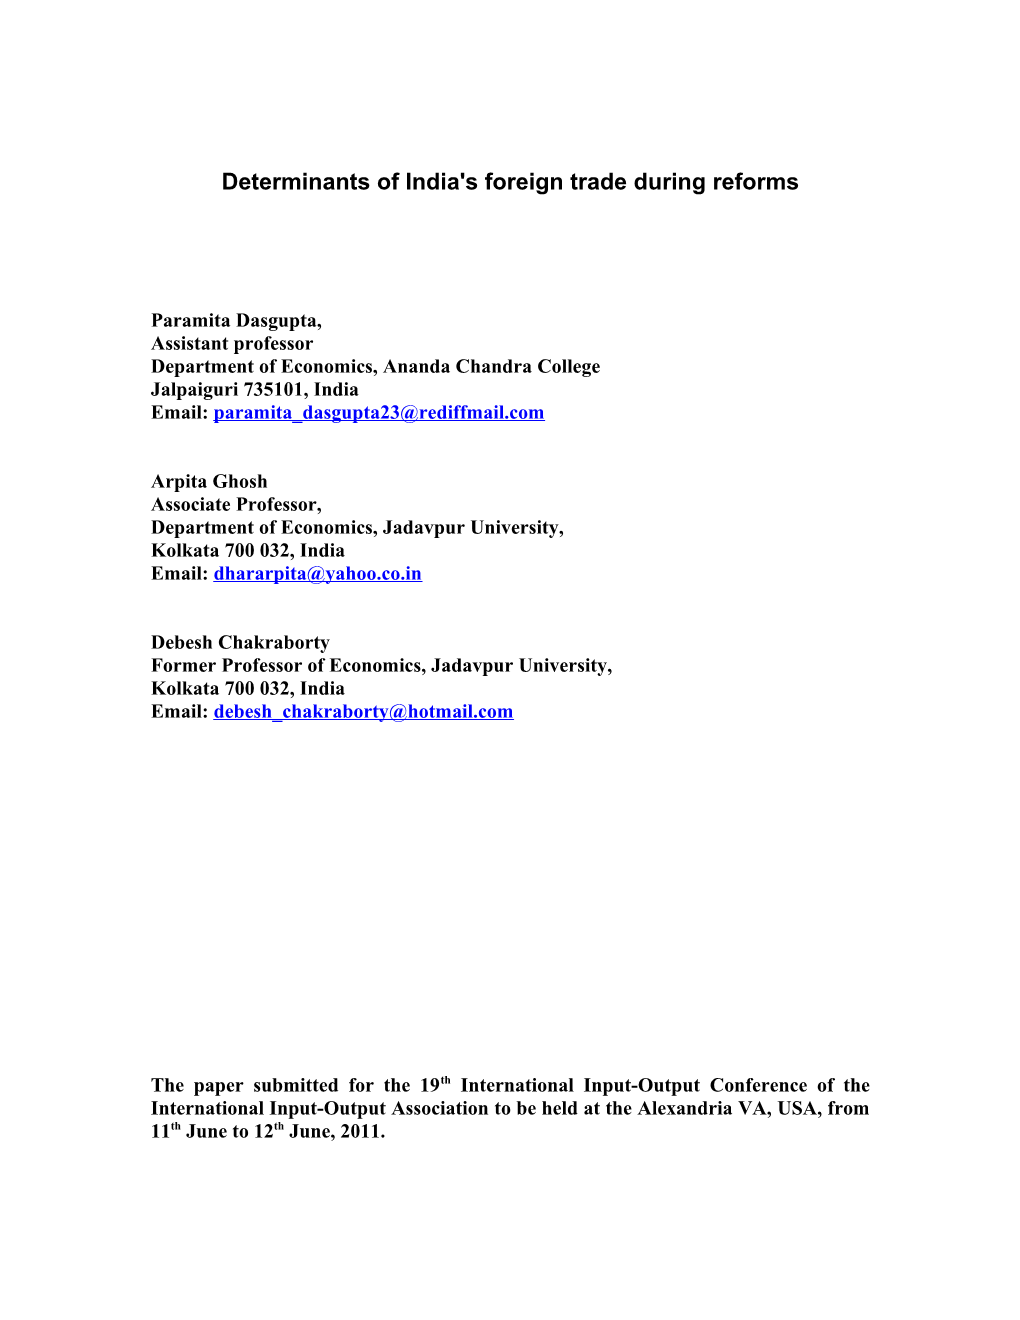 Determinants of India's Foreign Trade During Reforms